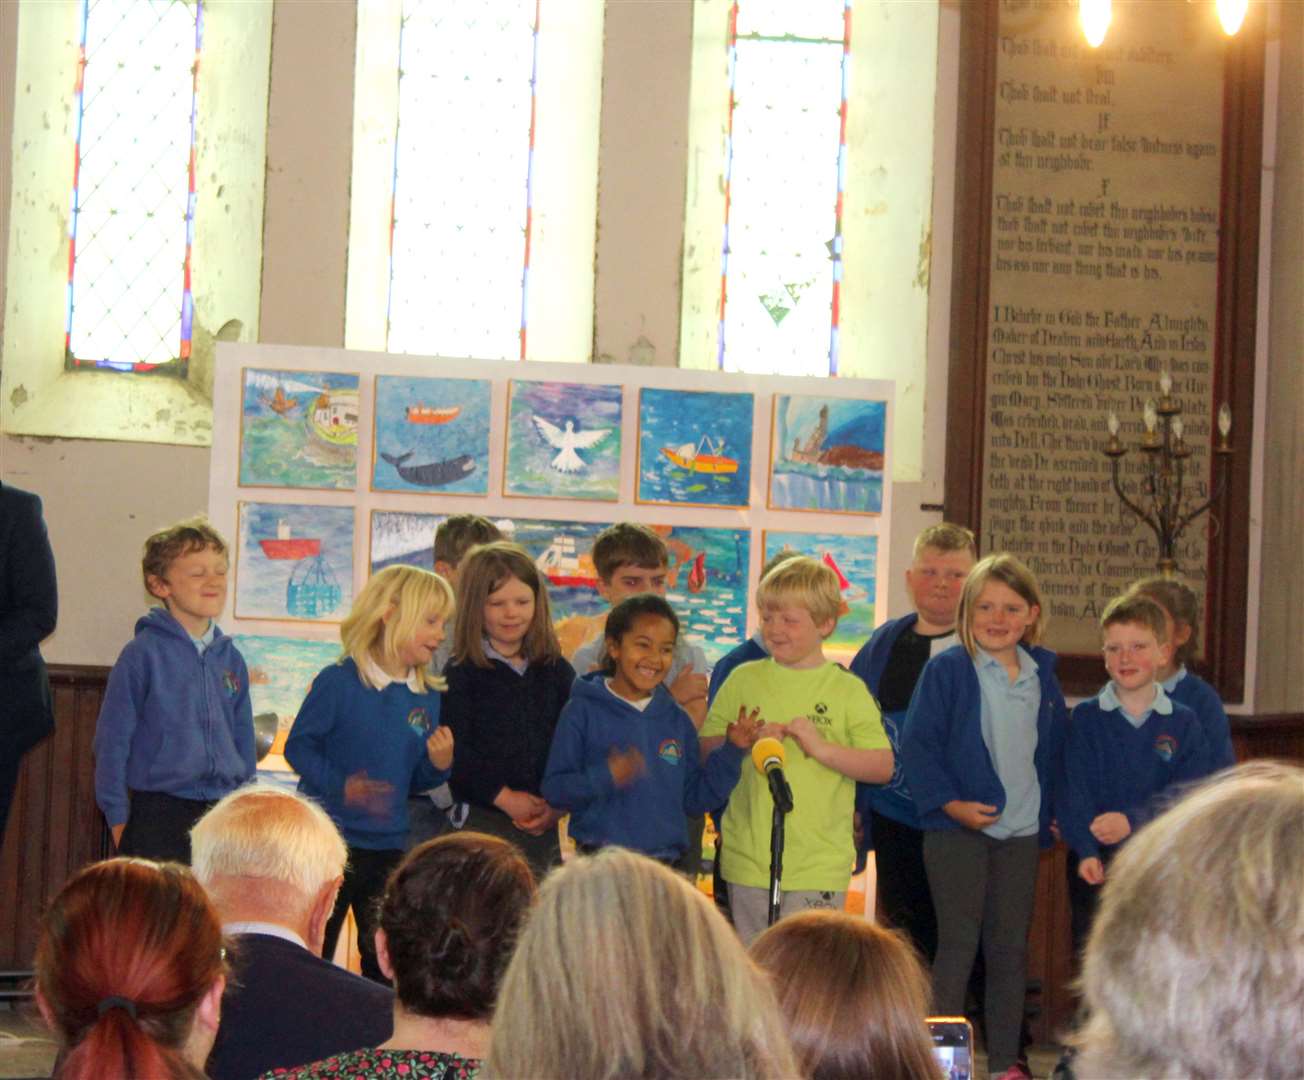 Children from Lochinver Primary School performed two songs at the unveiling of the artwork. Photo: Niall Harkiss